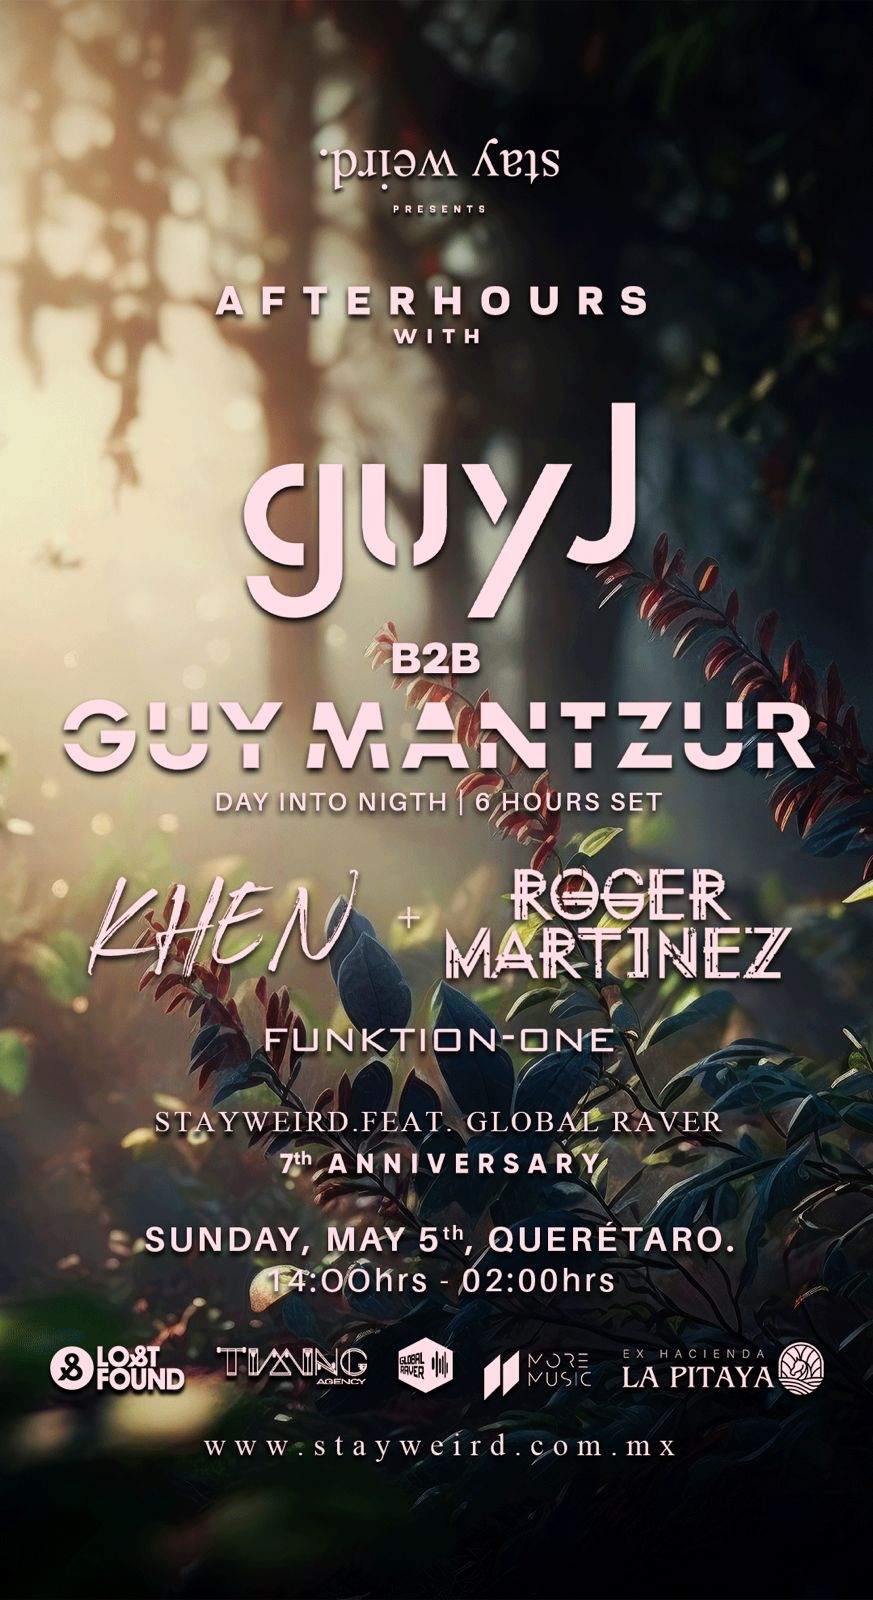 After Hours with Guy J and Guy Mantzur / Stay Weird + Global Raver 7th Anniversary - Página frontal